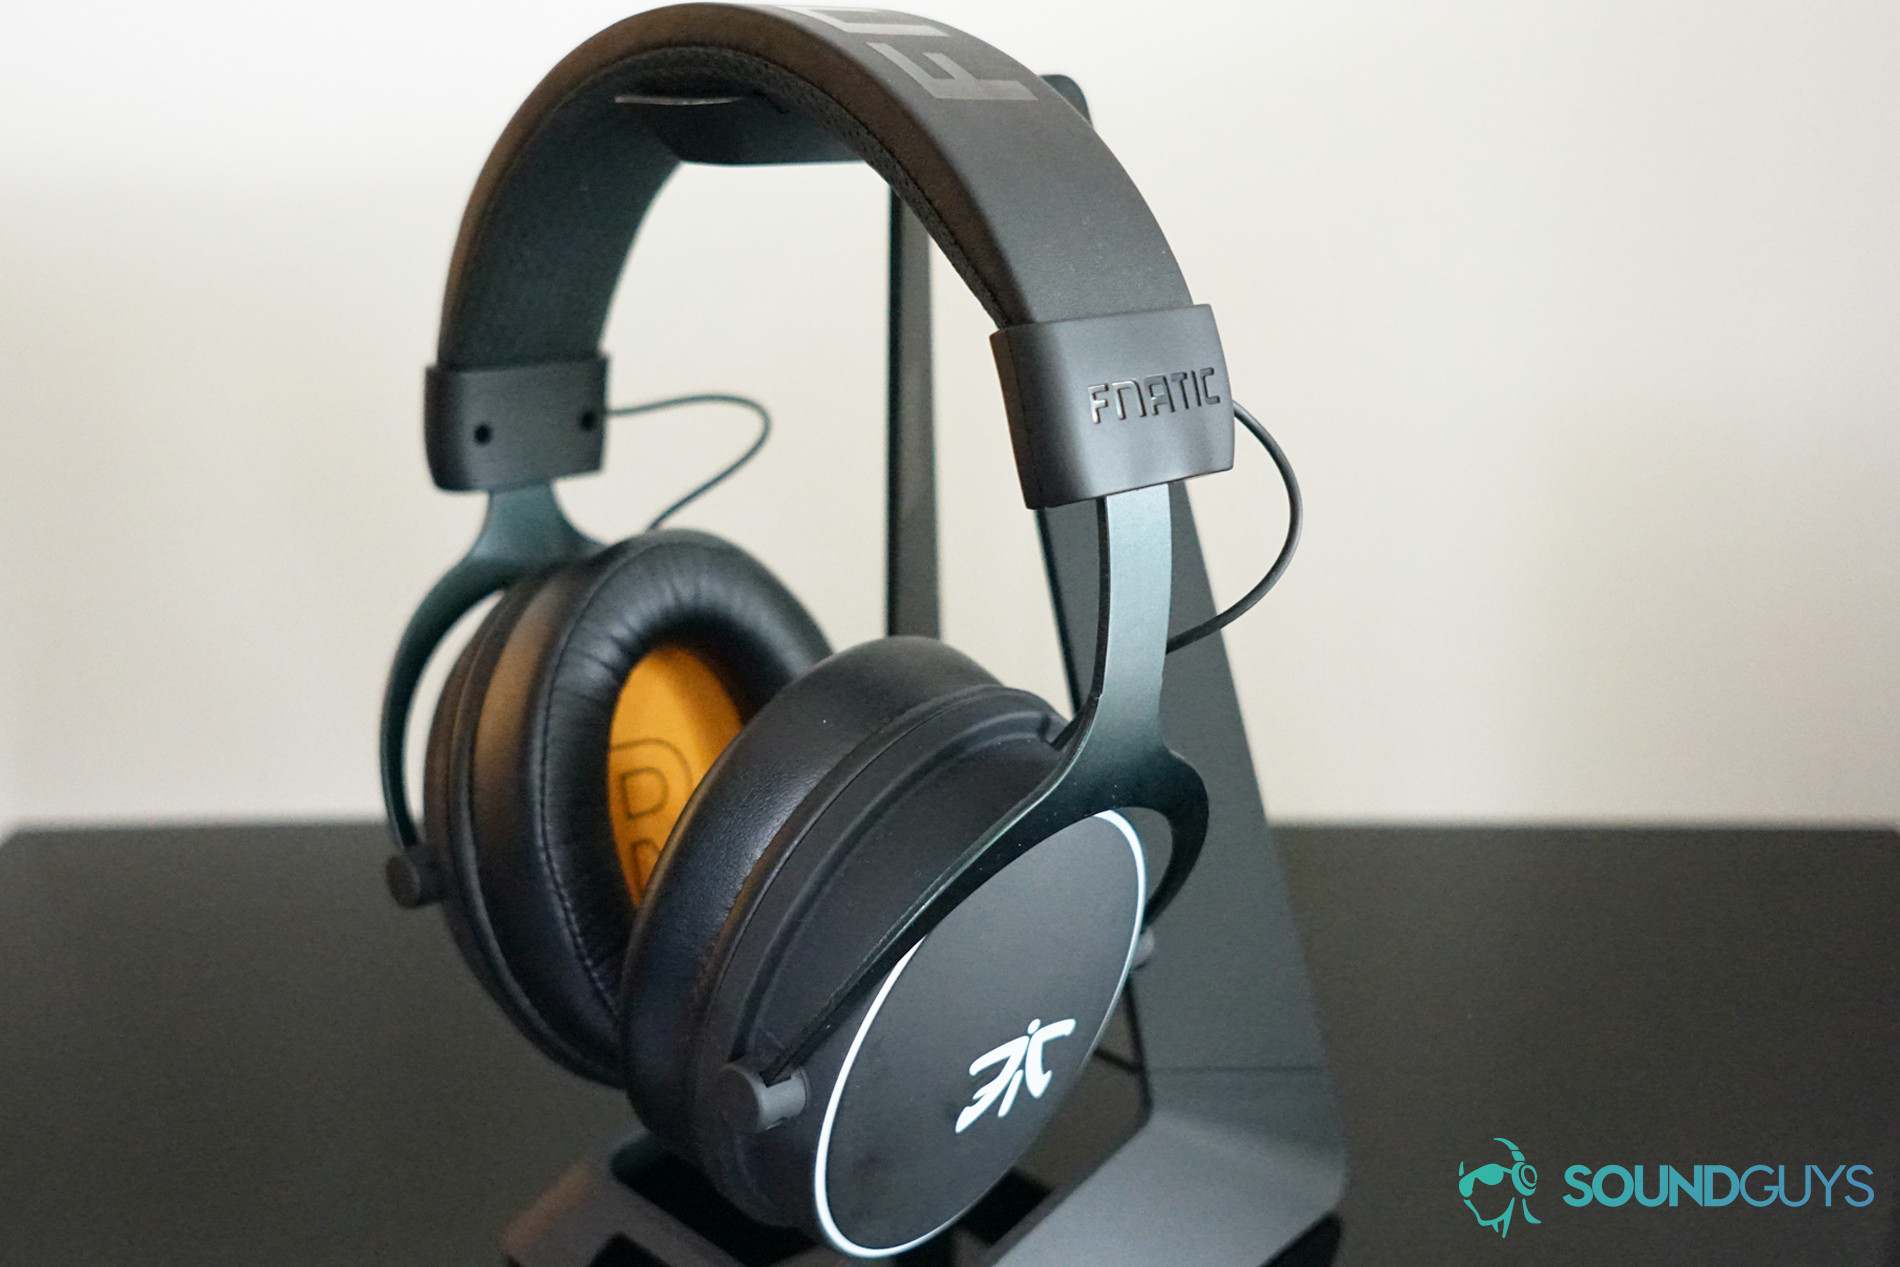 The Fnatic React gaming headset sits on a headphone stand.